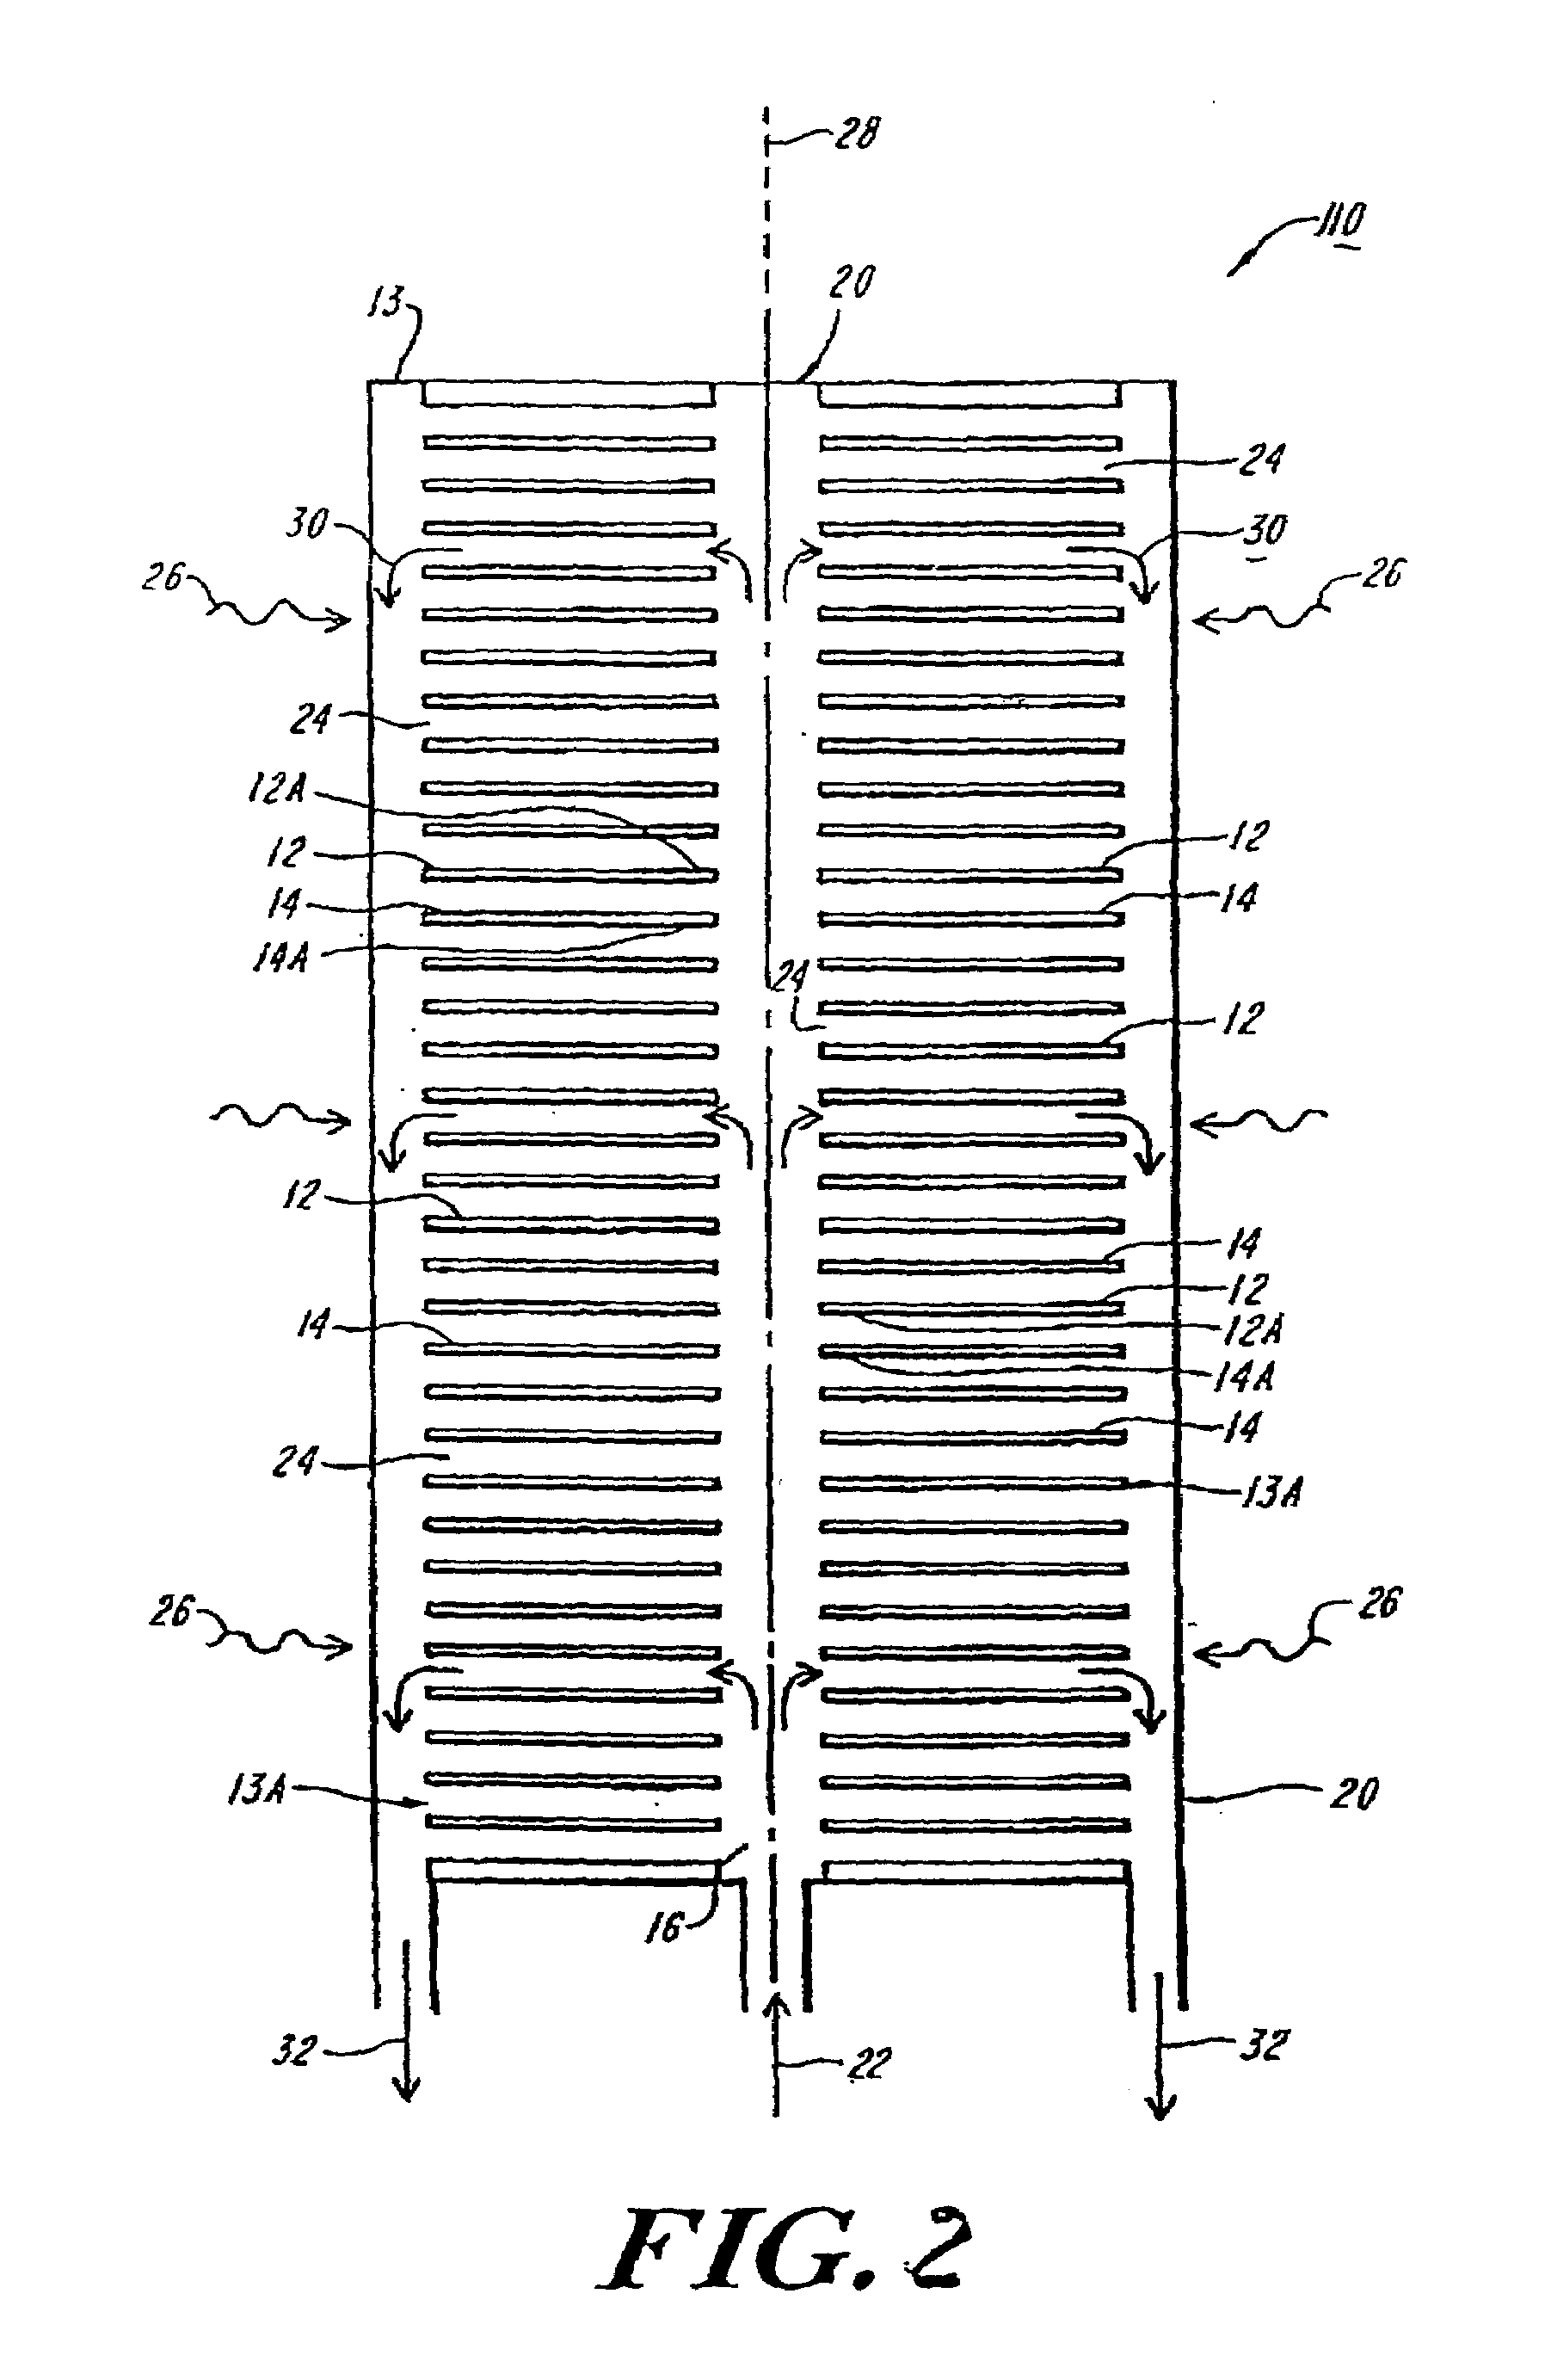 Multi-function energy system operable as a fuel cell, reformer, or thermal plant